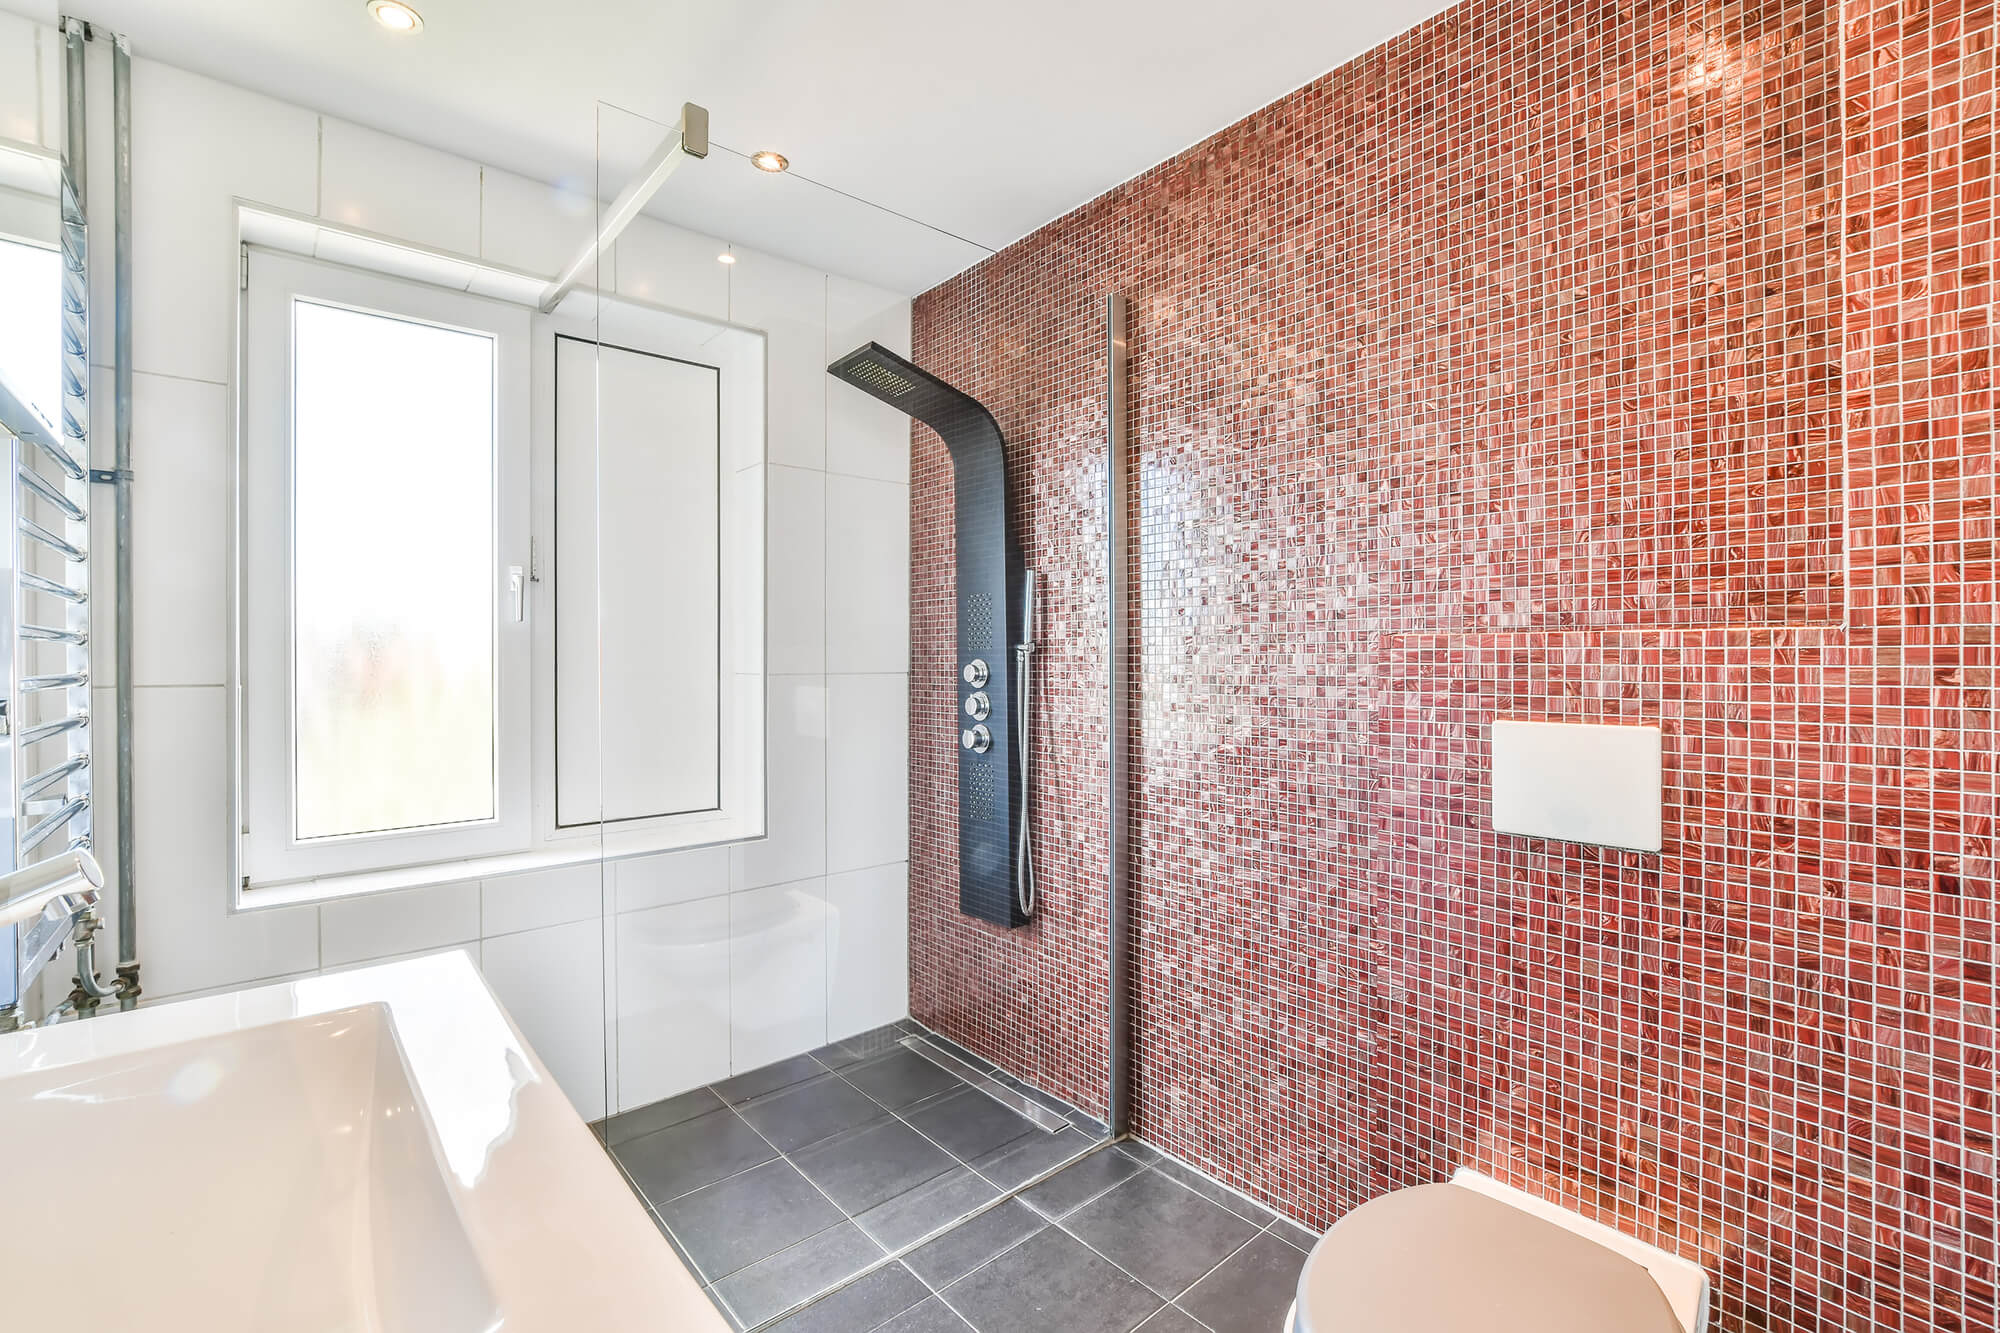 Bathroom with tiles in need of tile cleaning services